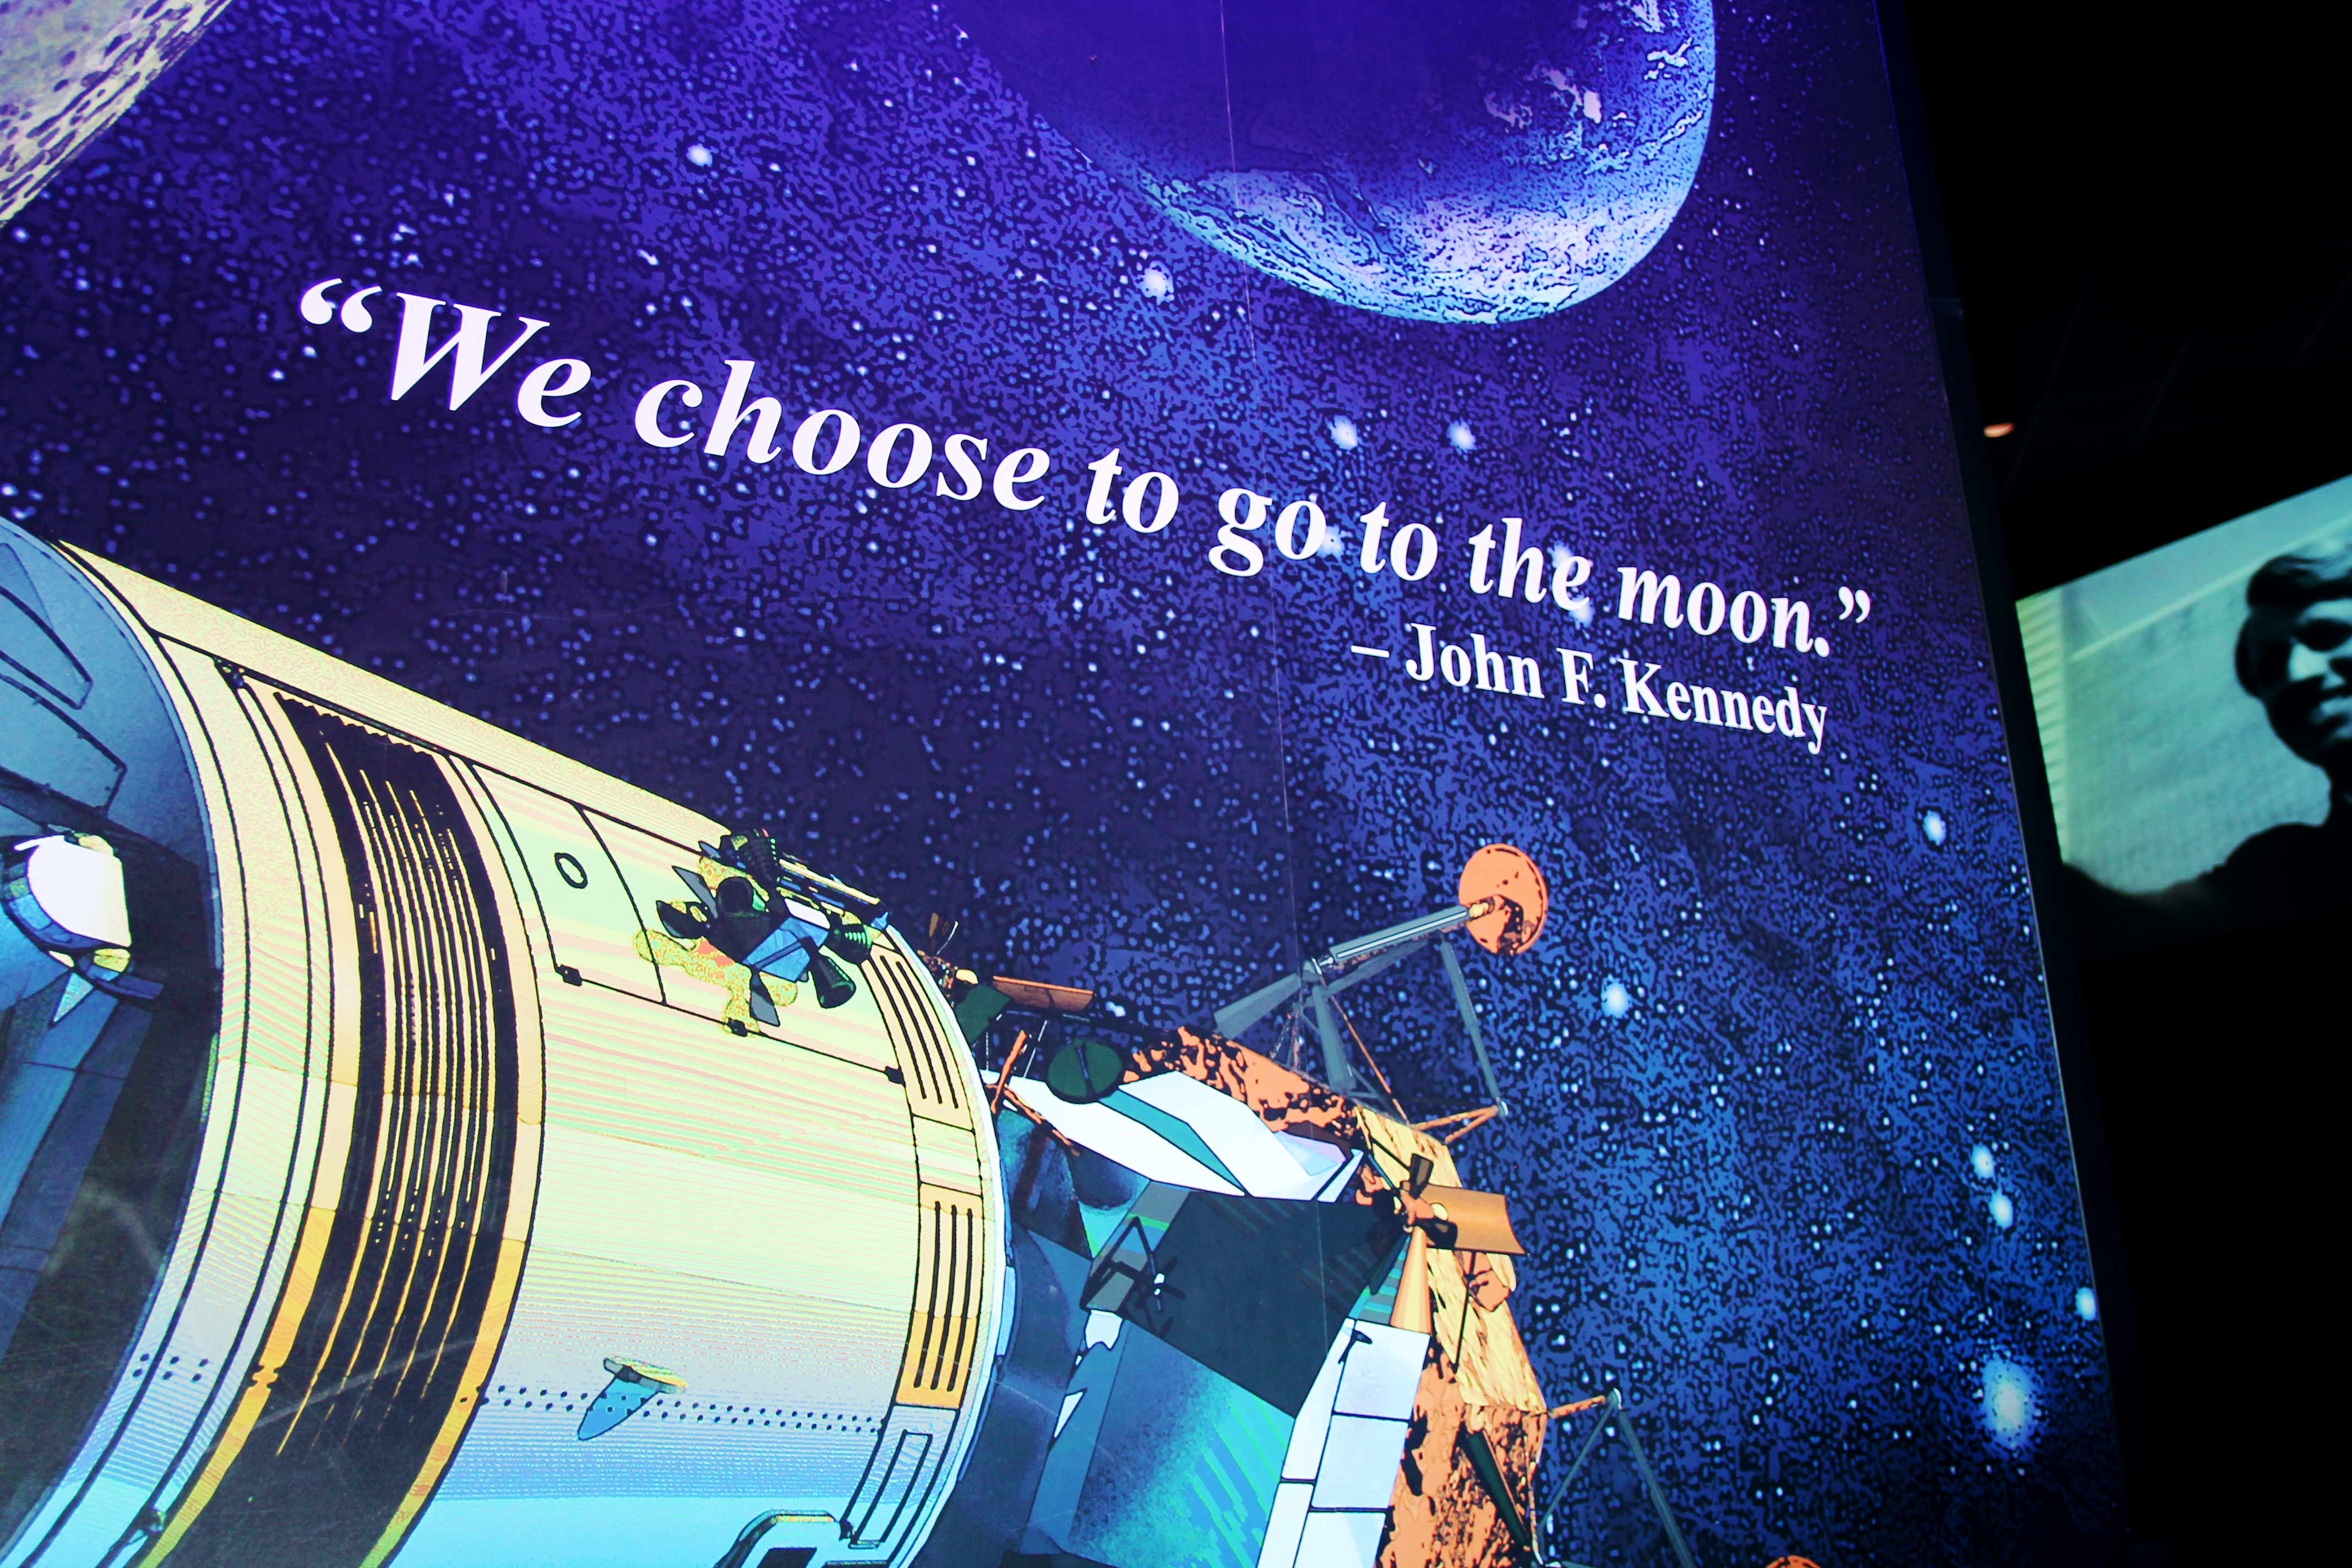 Visita ao Kennedy Space Center - Drawing Dreaming